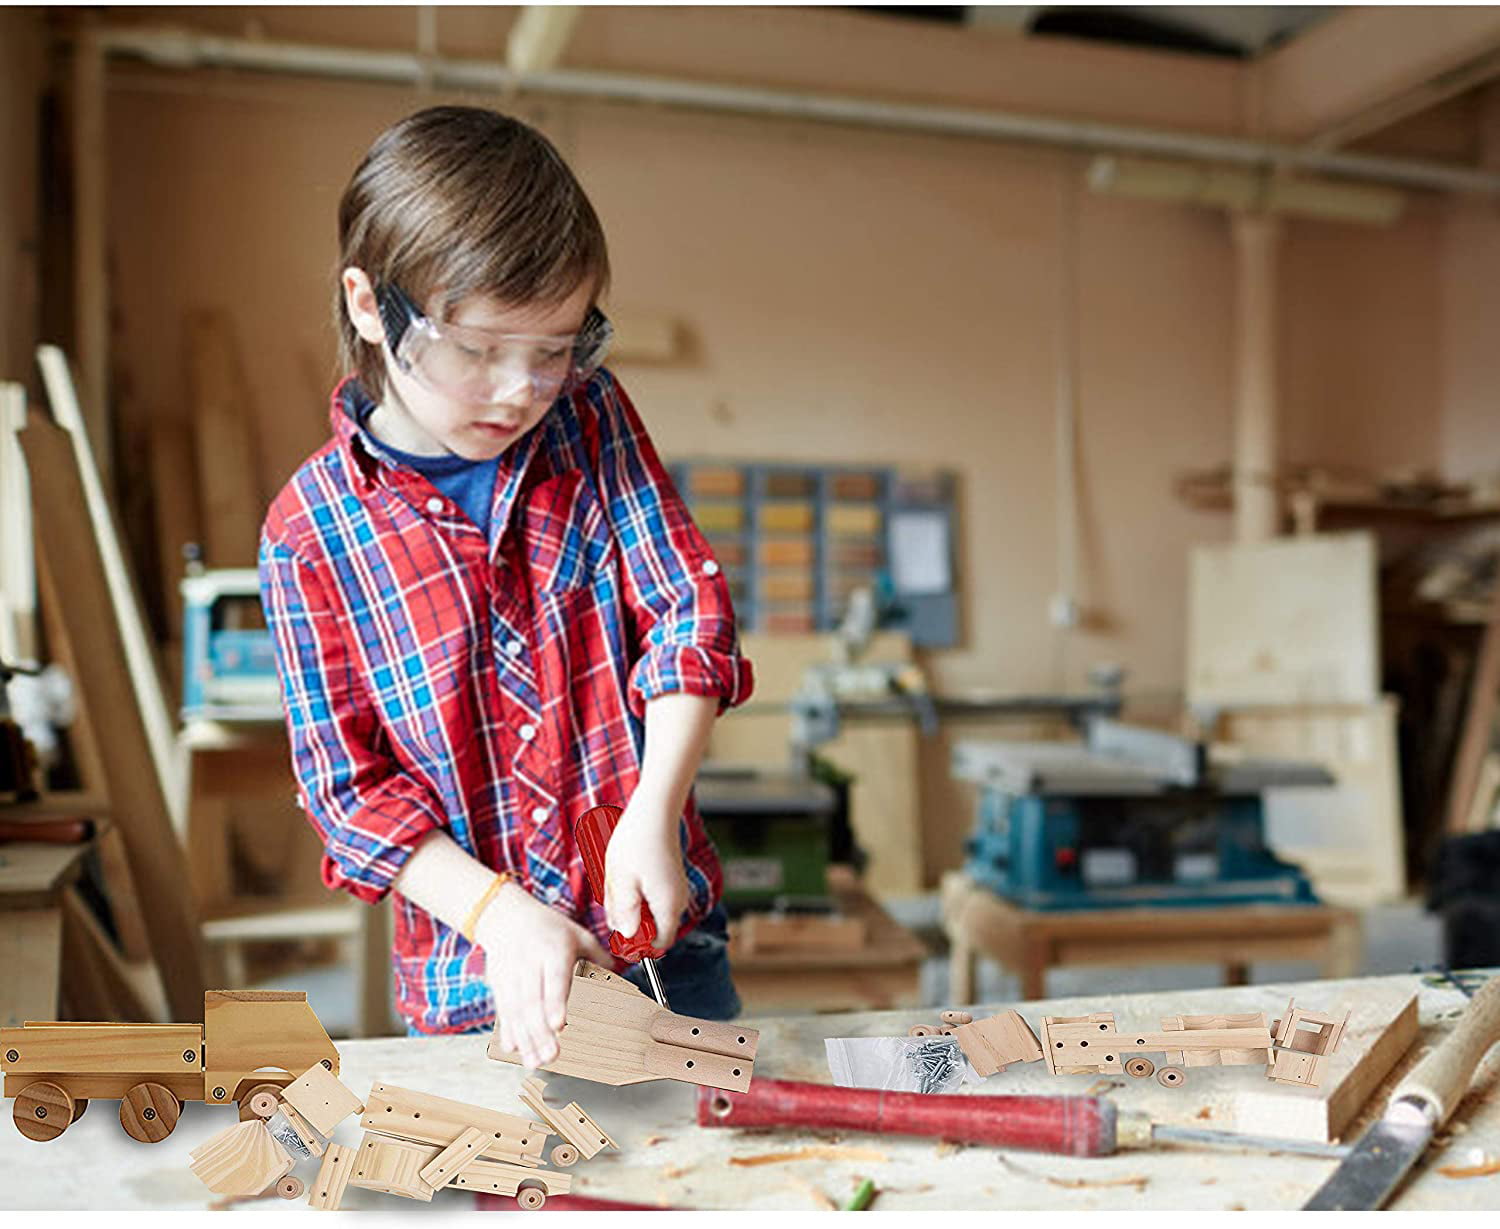  Kraftic Woodworking Building Kit for Kids and Adults